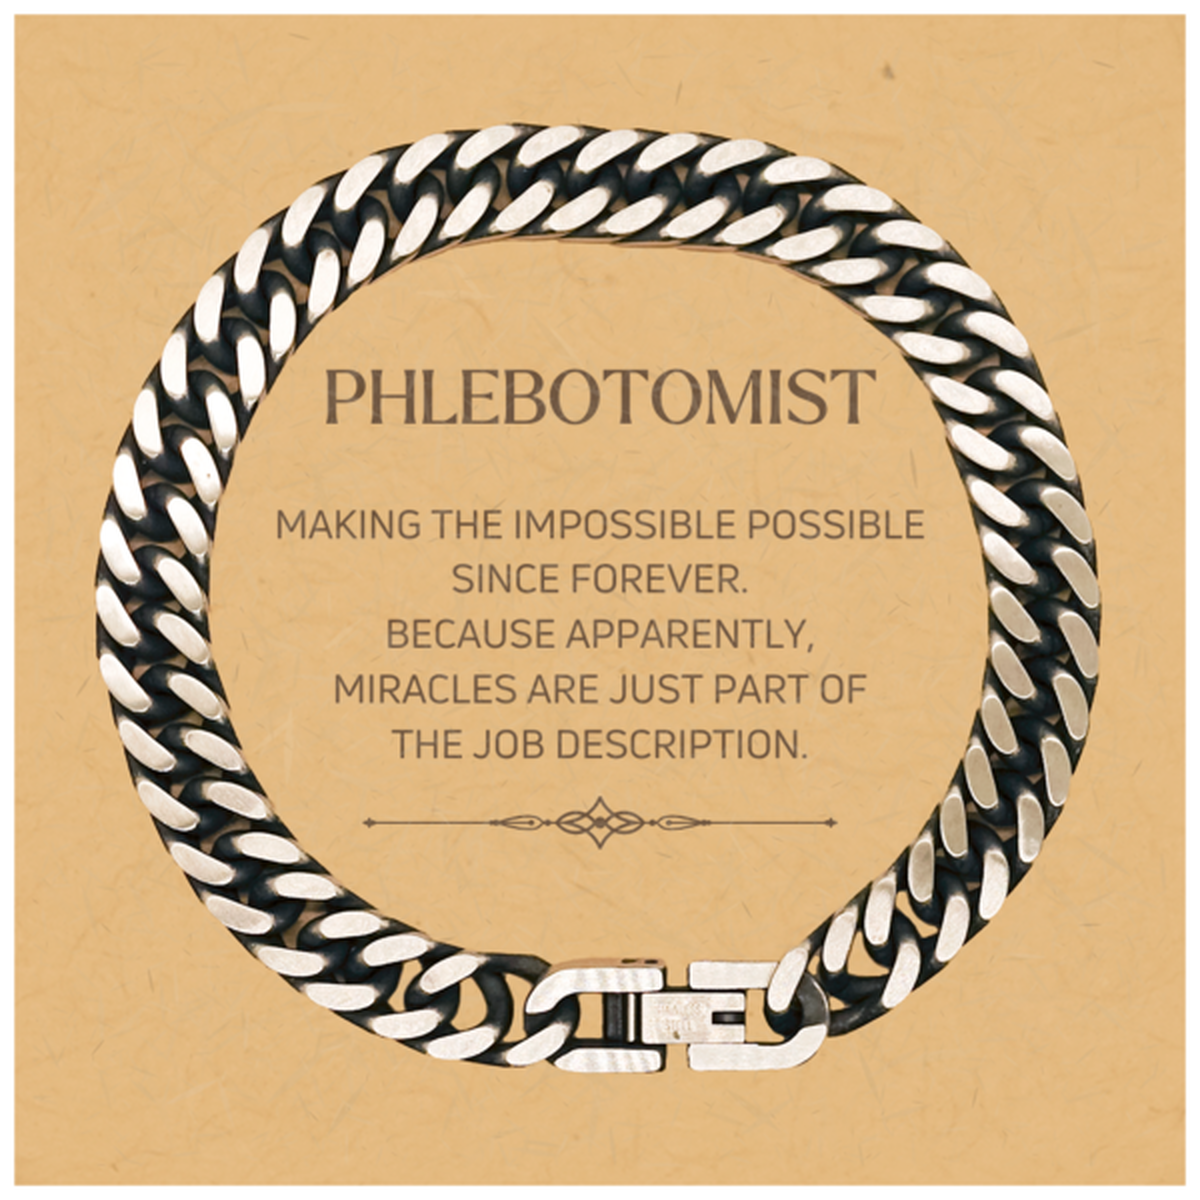 Funny Phlebotomist Gifts, Miracles are just part of the job description, Inspirational Birthday Christmas Cuban Link Chain Bracelet For Phlebotomist, Men, Women, Coworkers, Friends, Boss